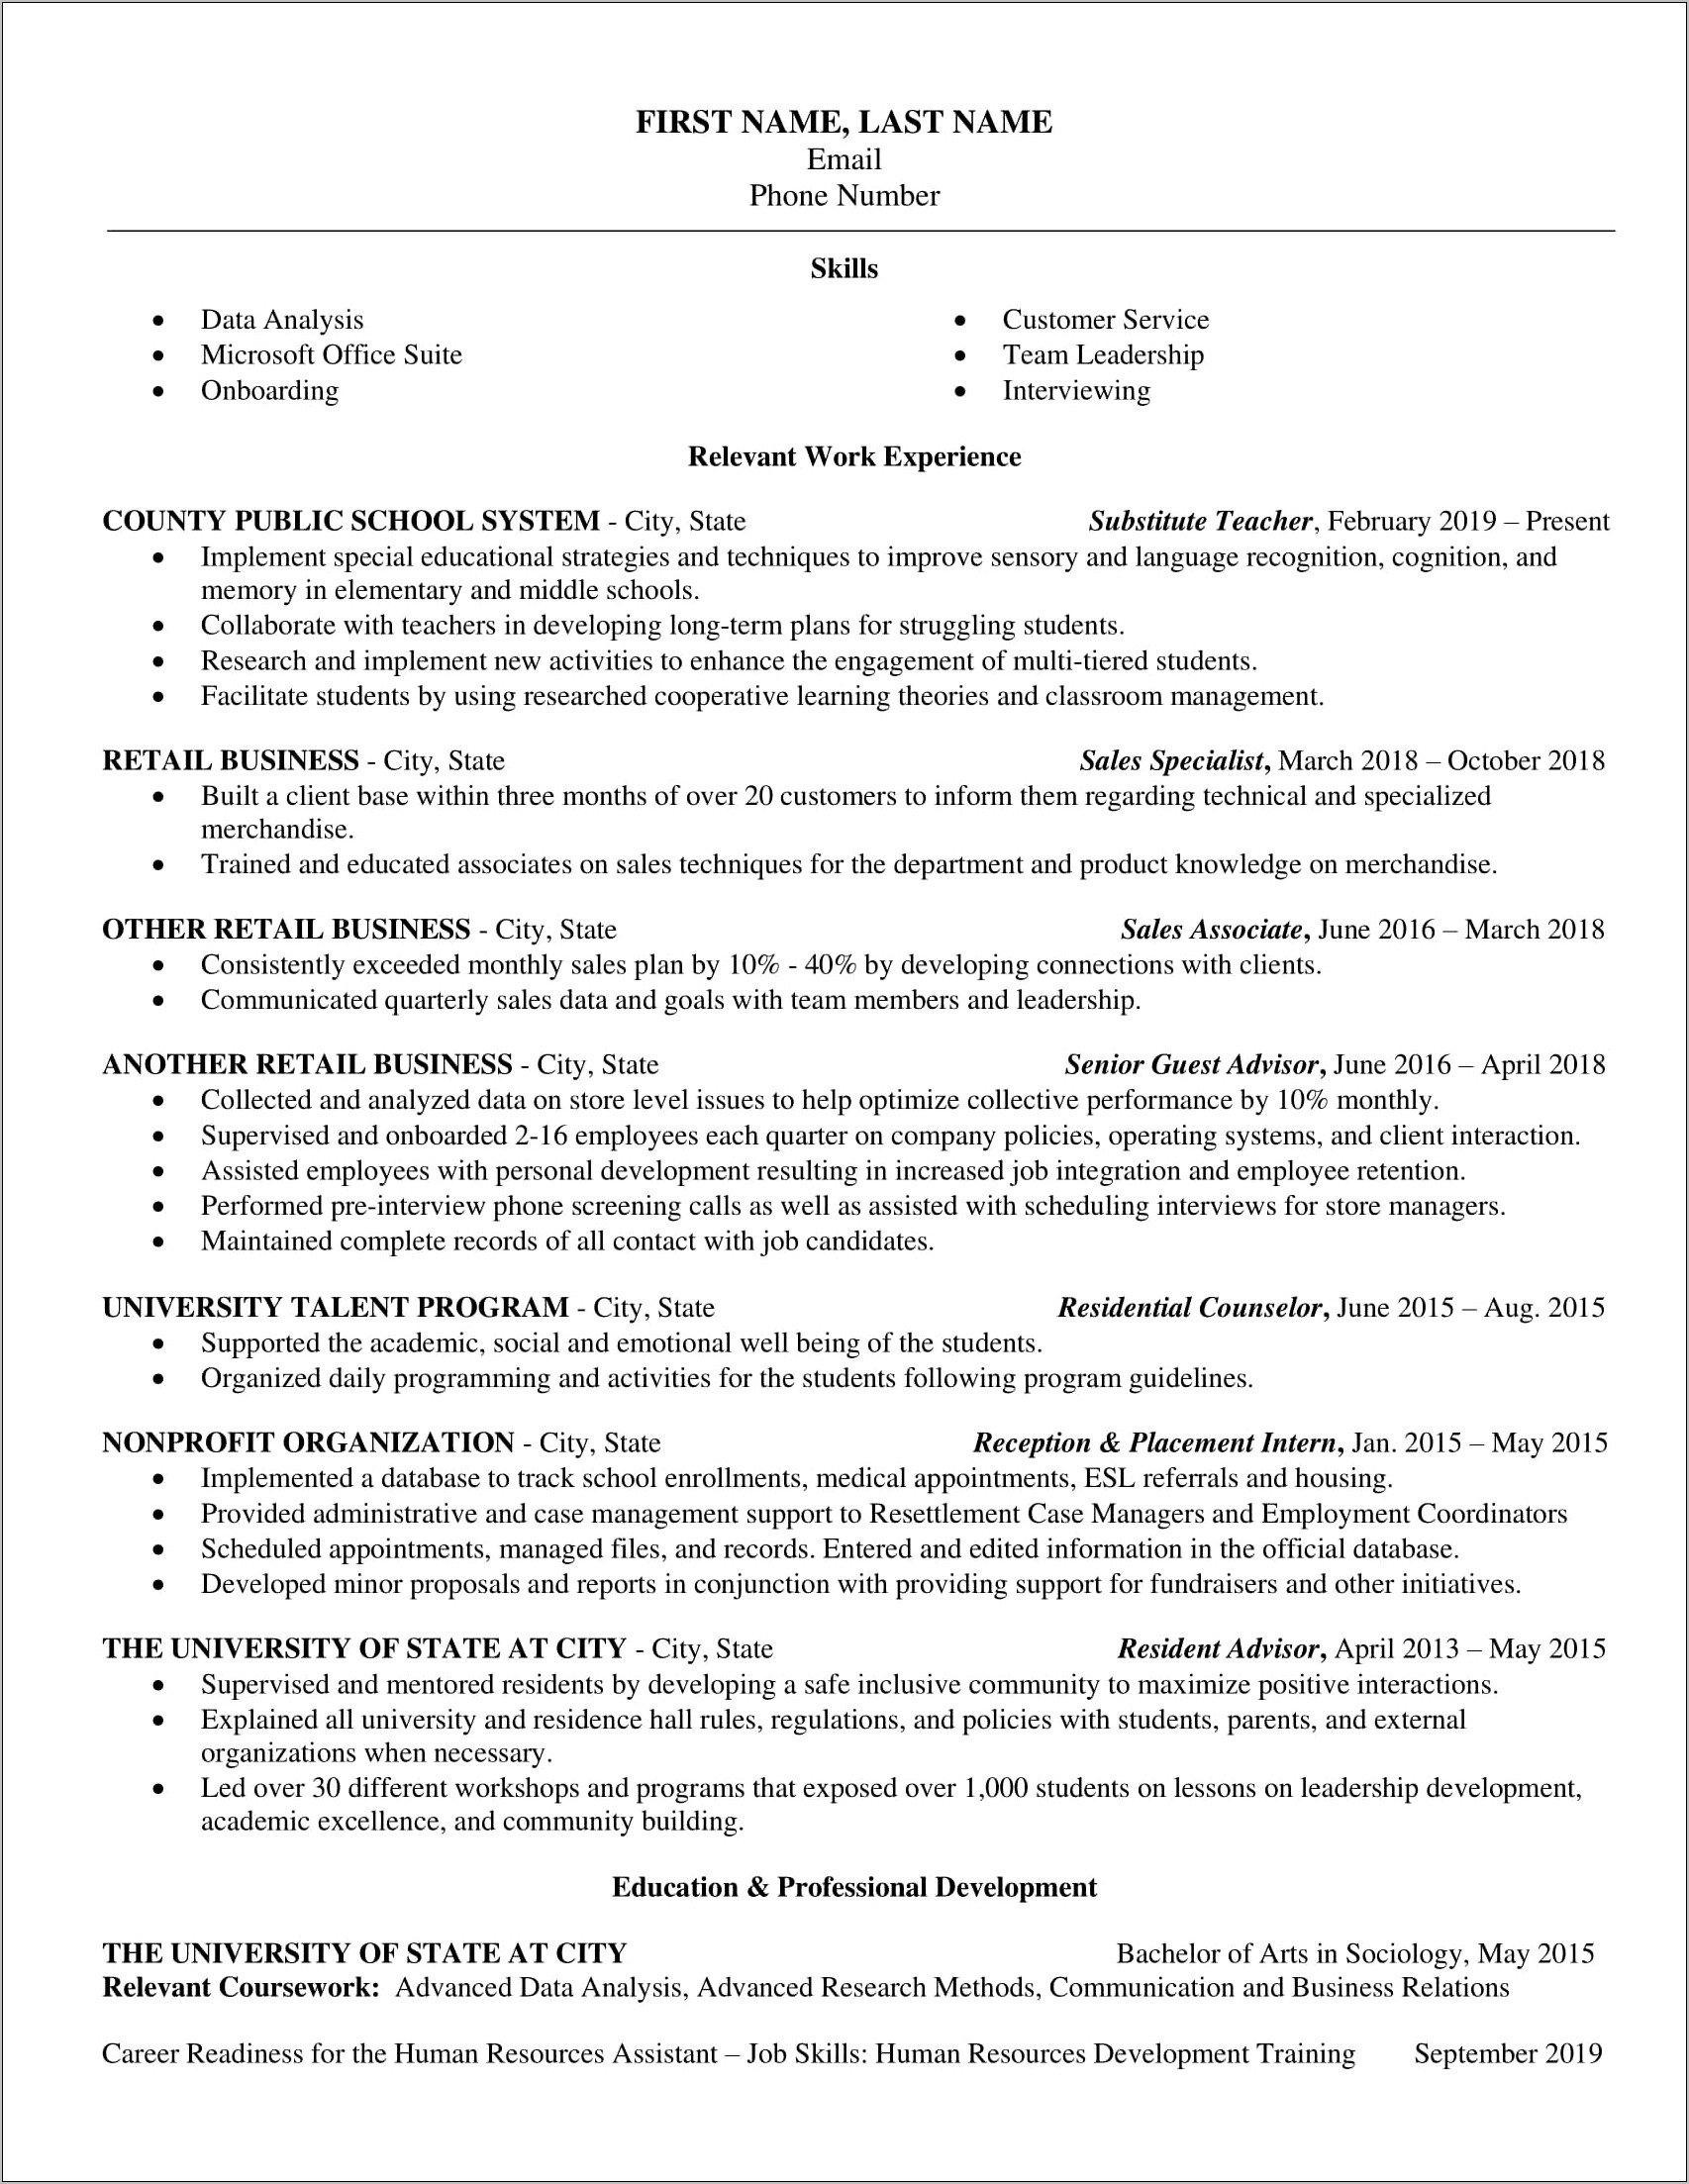 Resume Objective For Hr Position With No Experience